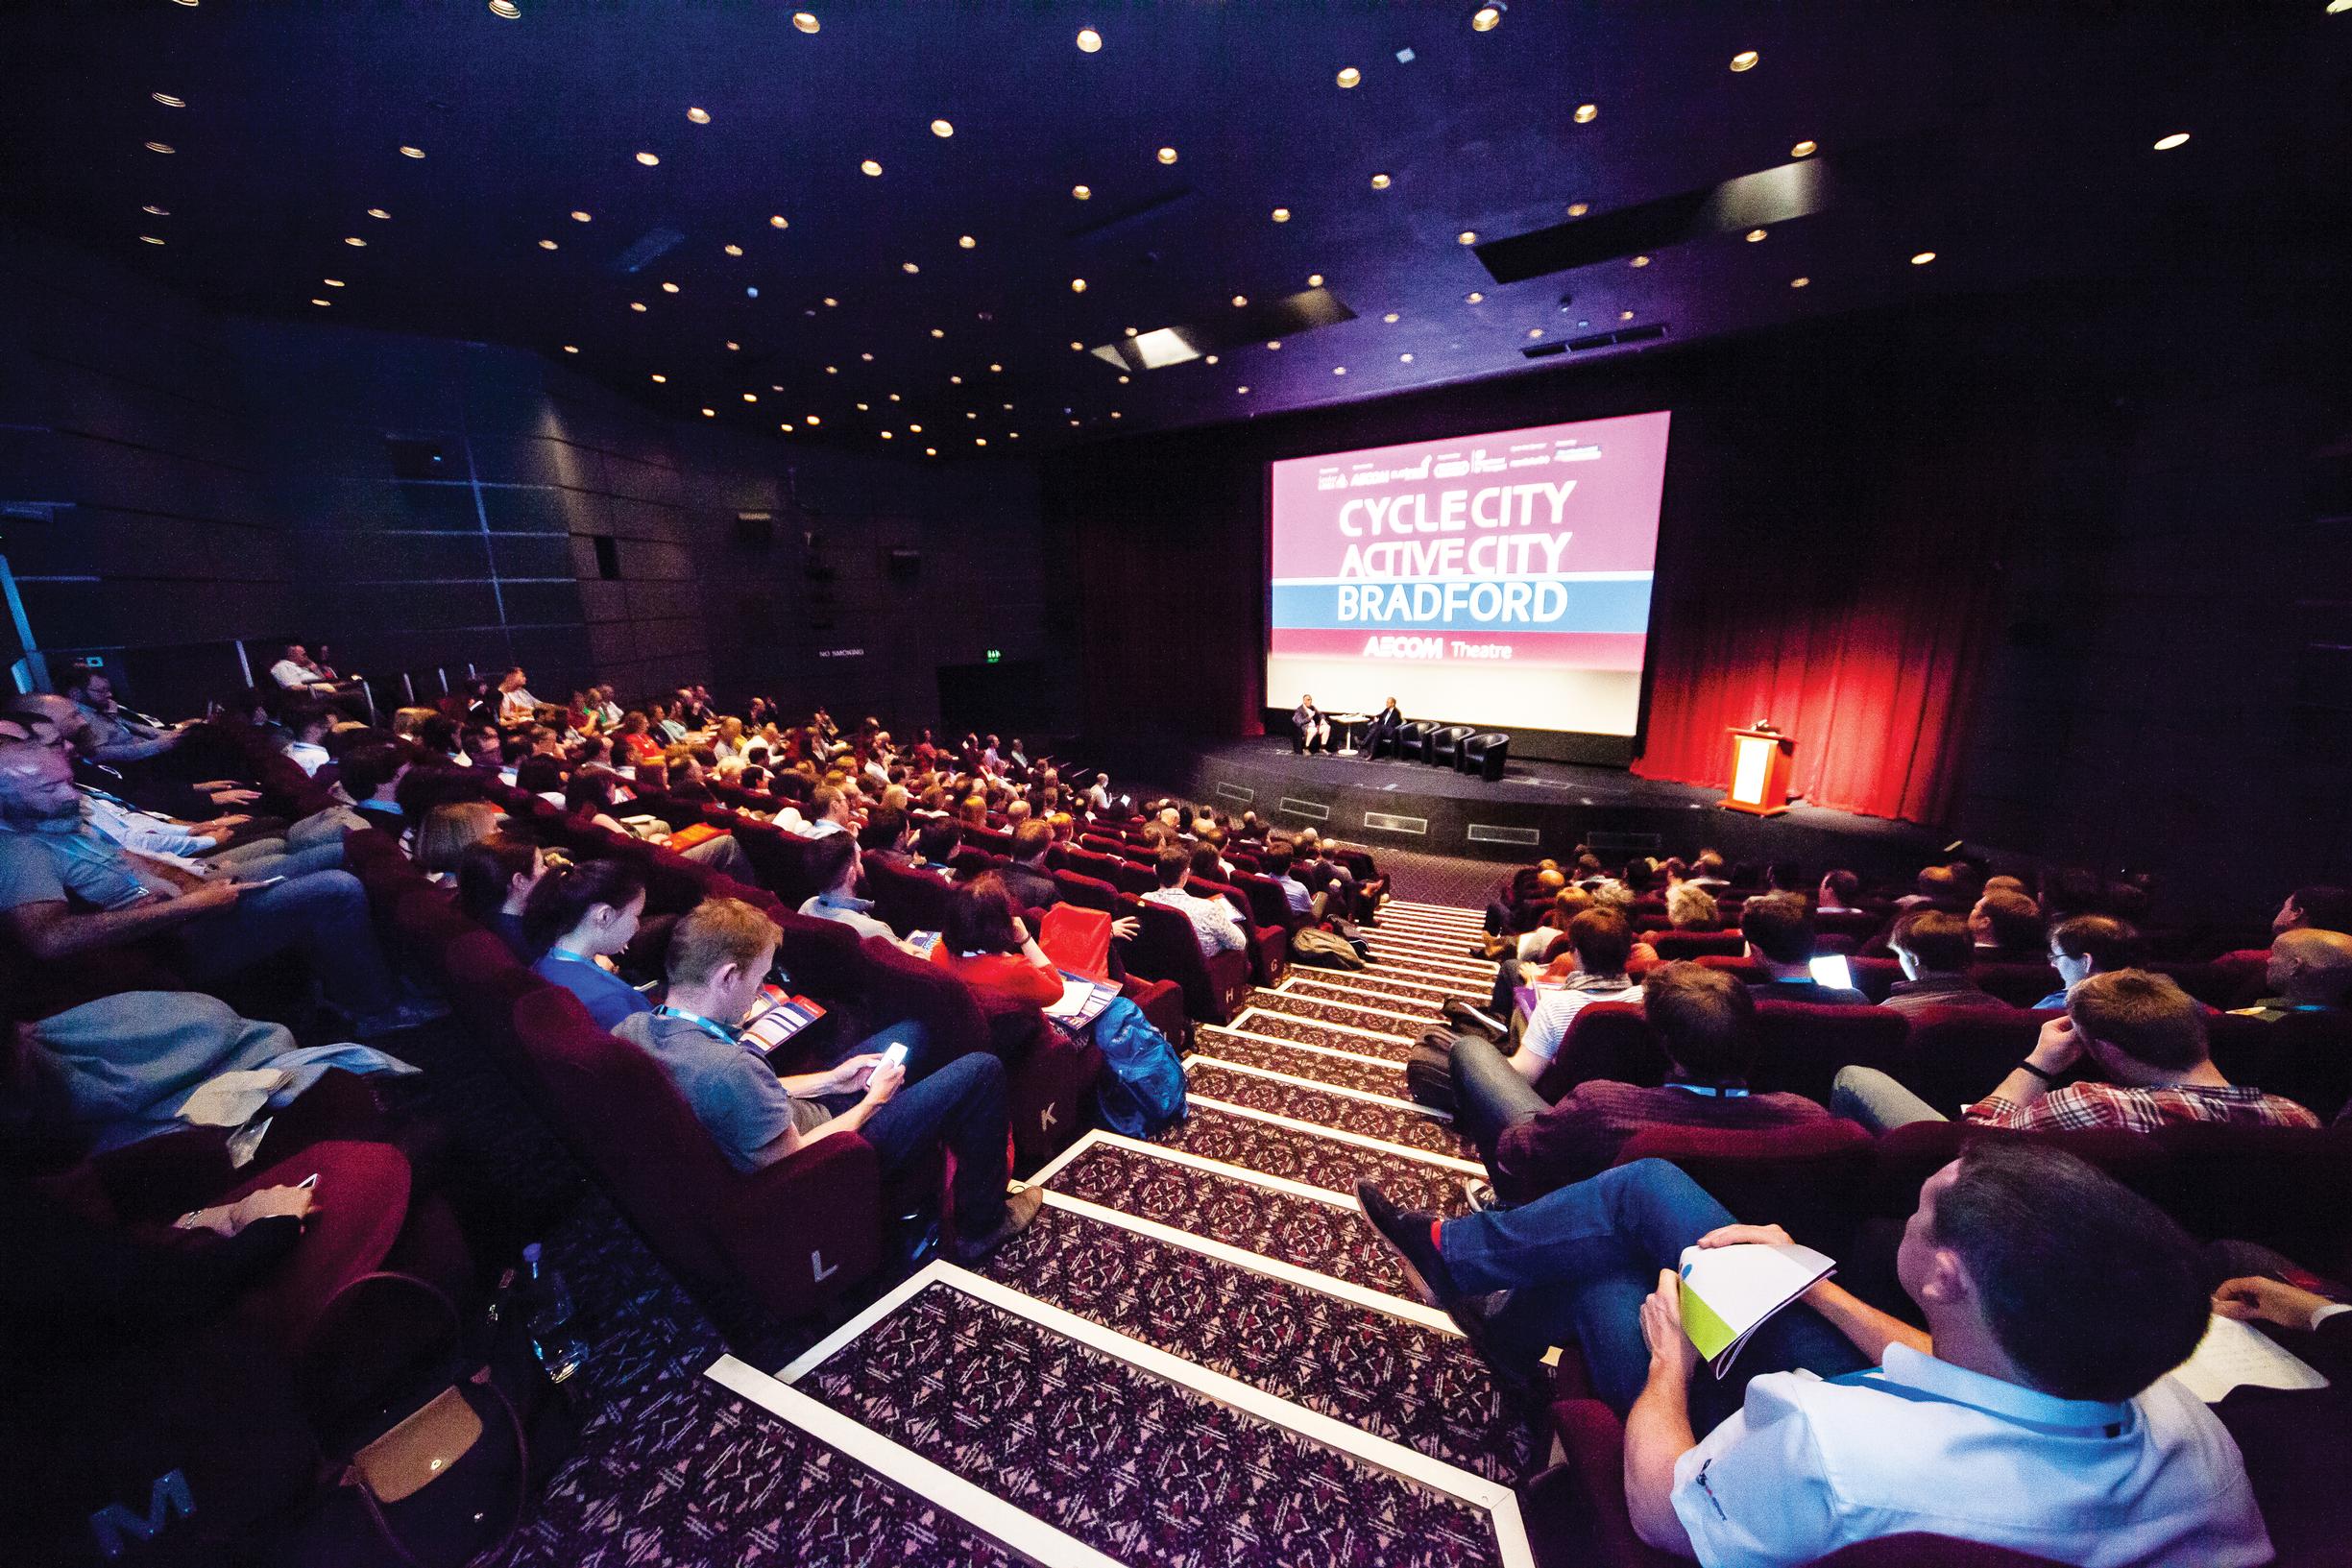 Nearly 300 delegates attended this year’s event held at iconic Bradford venues the National Science and Media Museum and the Alhambra theatre